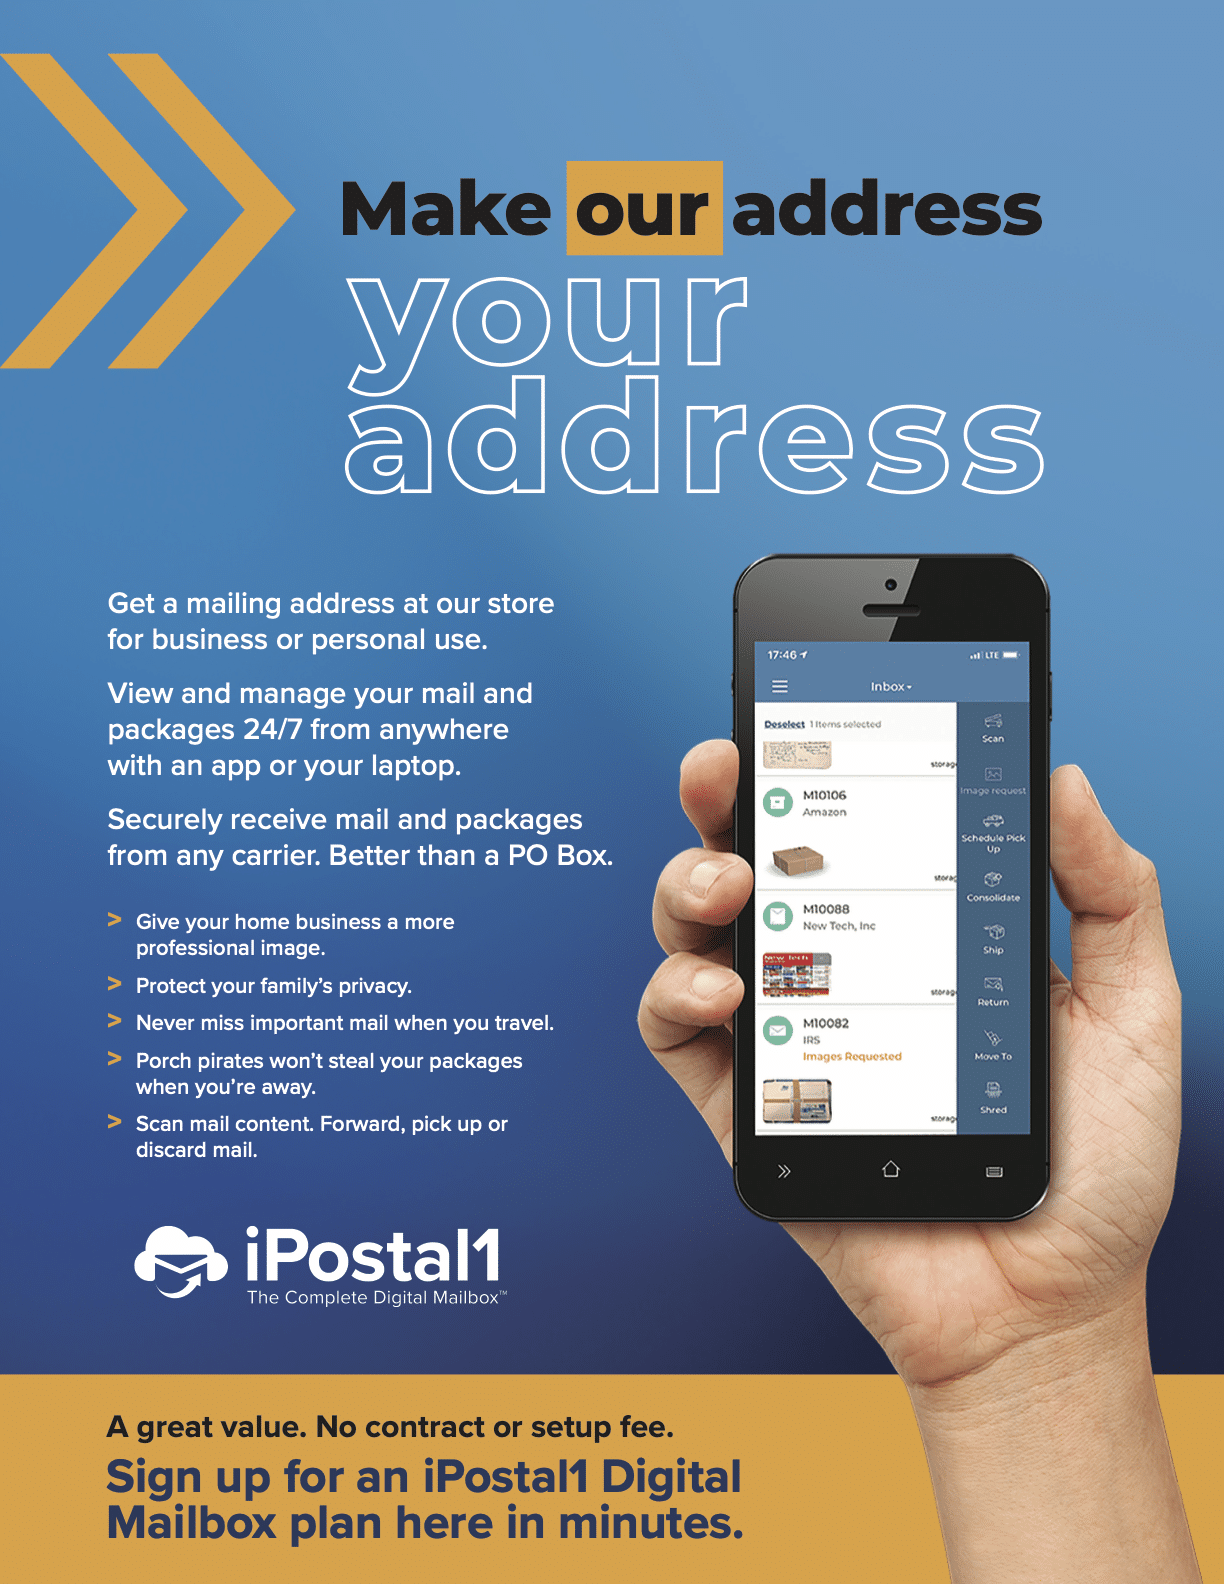 Virtual Business Address with iPostal1 at The Works - personal account